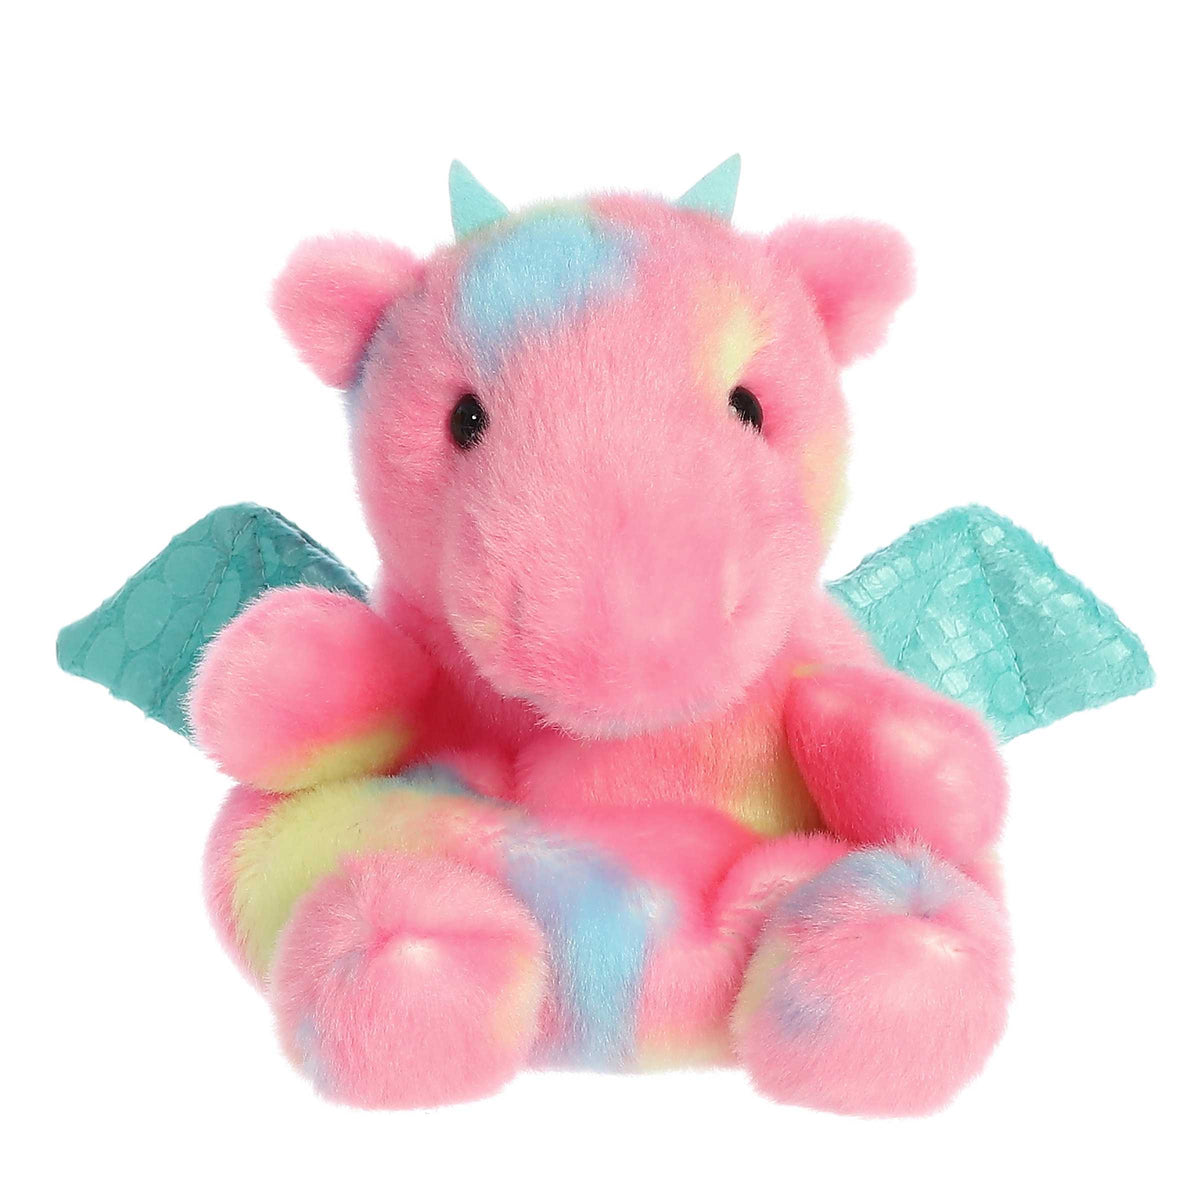 Anya Dragon plush is a vision of plush enchantment with her pastel pink and rainbow hues, with teal wings